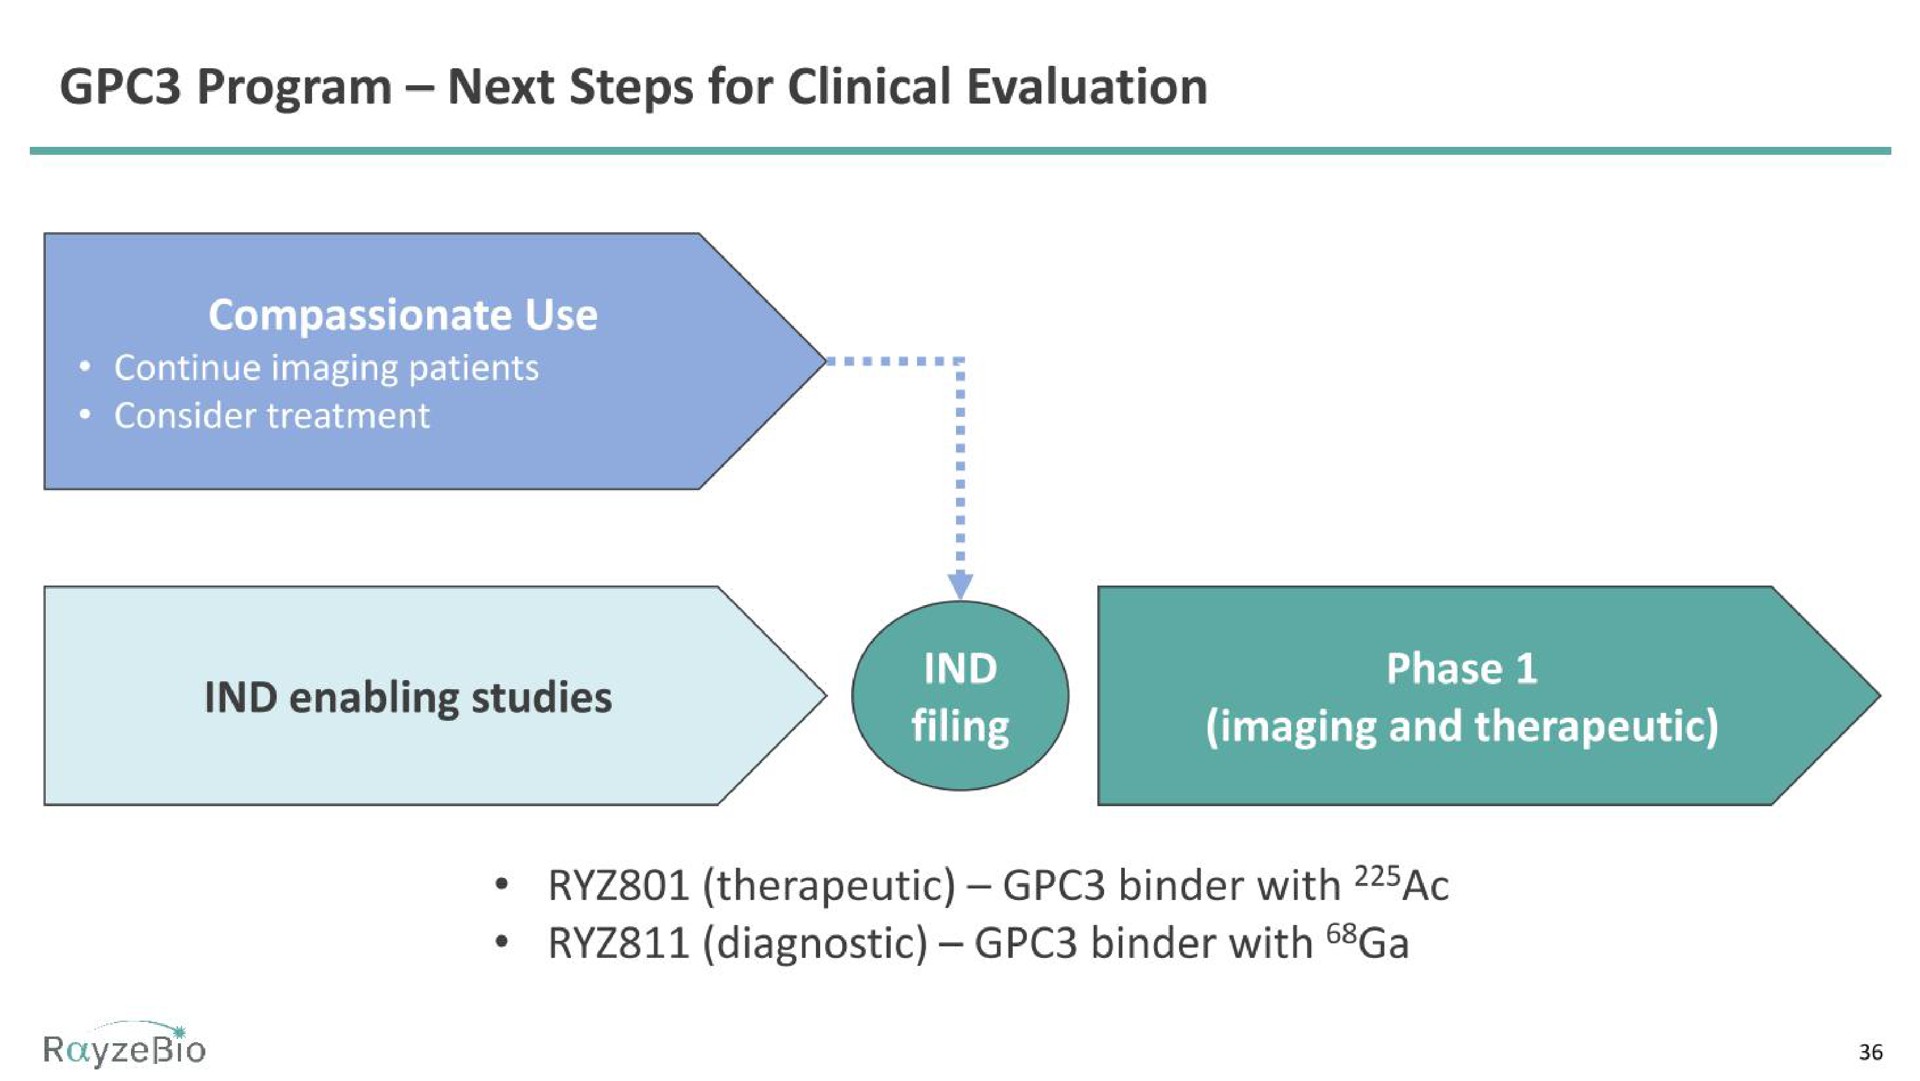 program next steps for clinical evaluation enabling studies ache imaging and therapeutic therapeutic binder with diagnostic binder with | RayzeBio